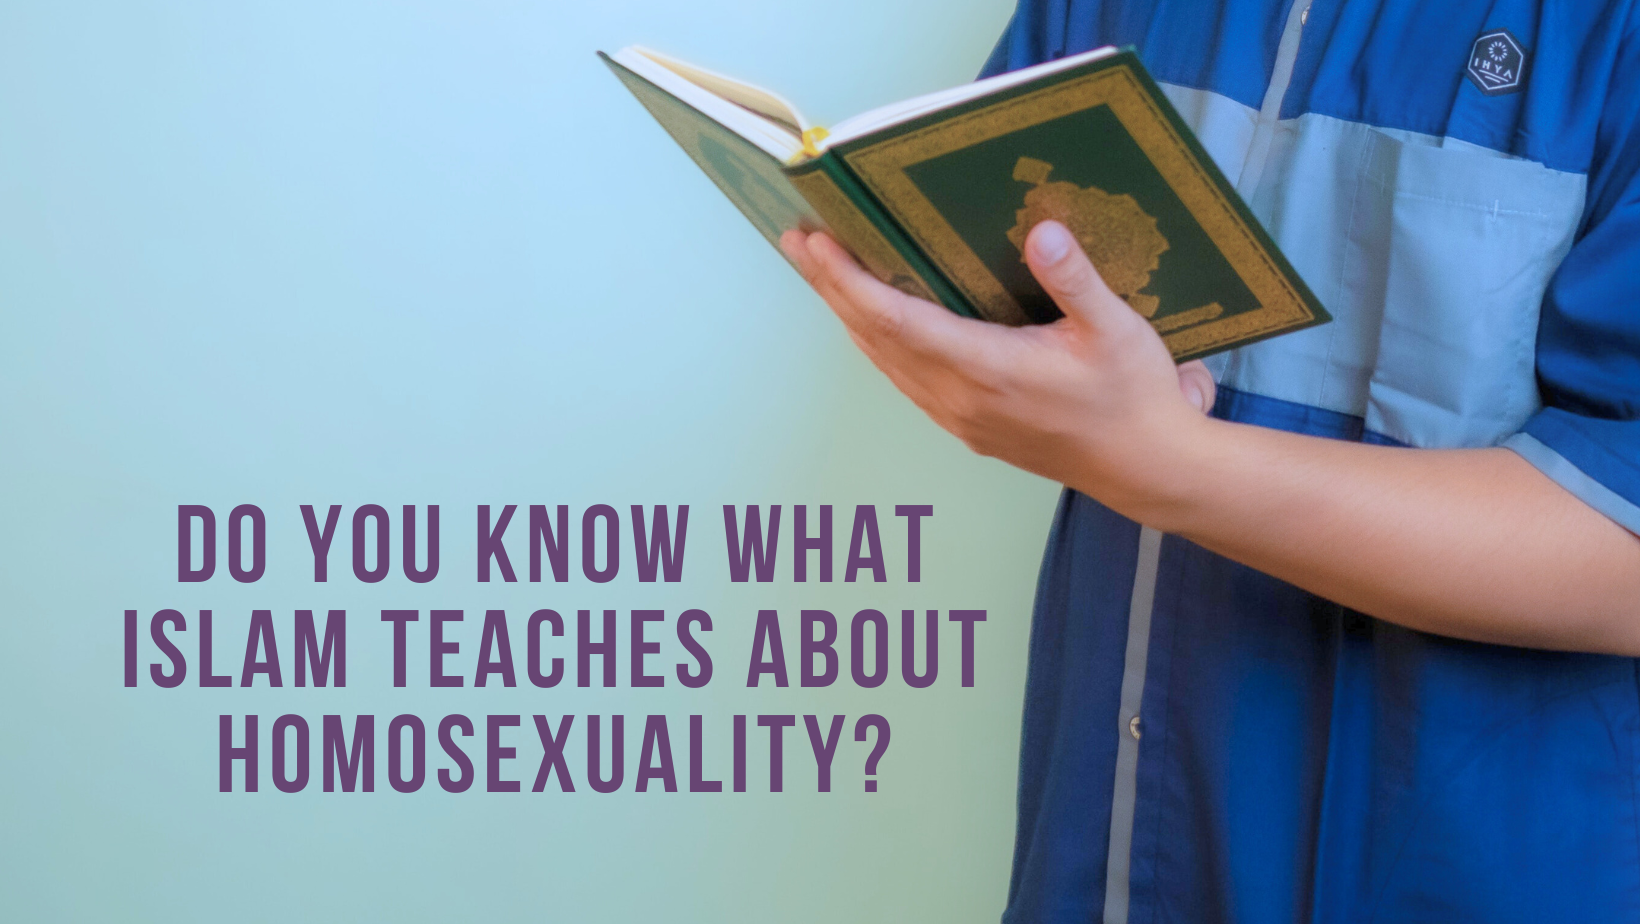 Do you know what Islam teaches about homosexuality?